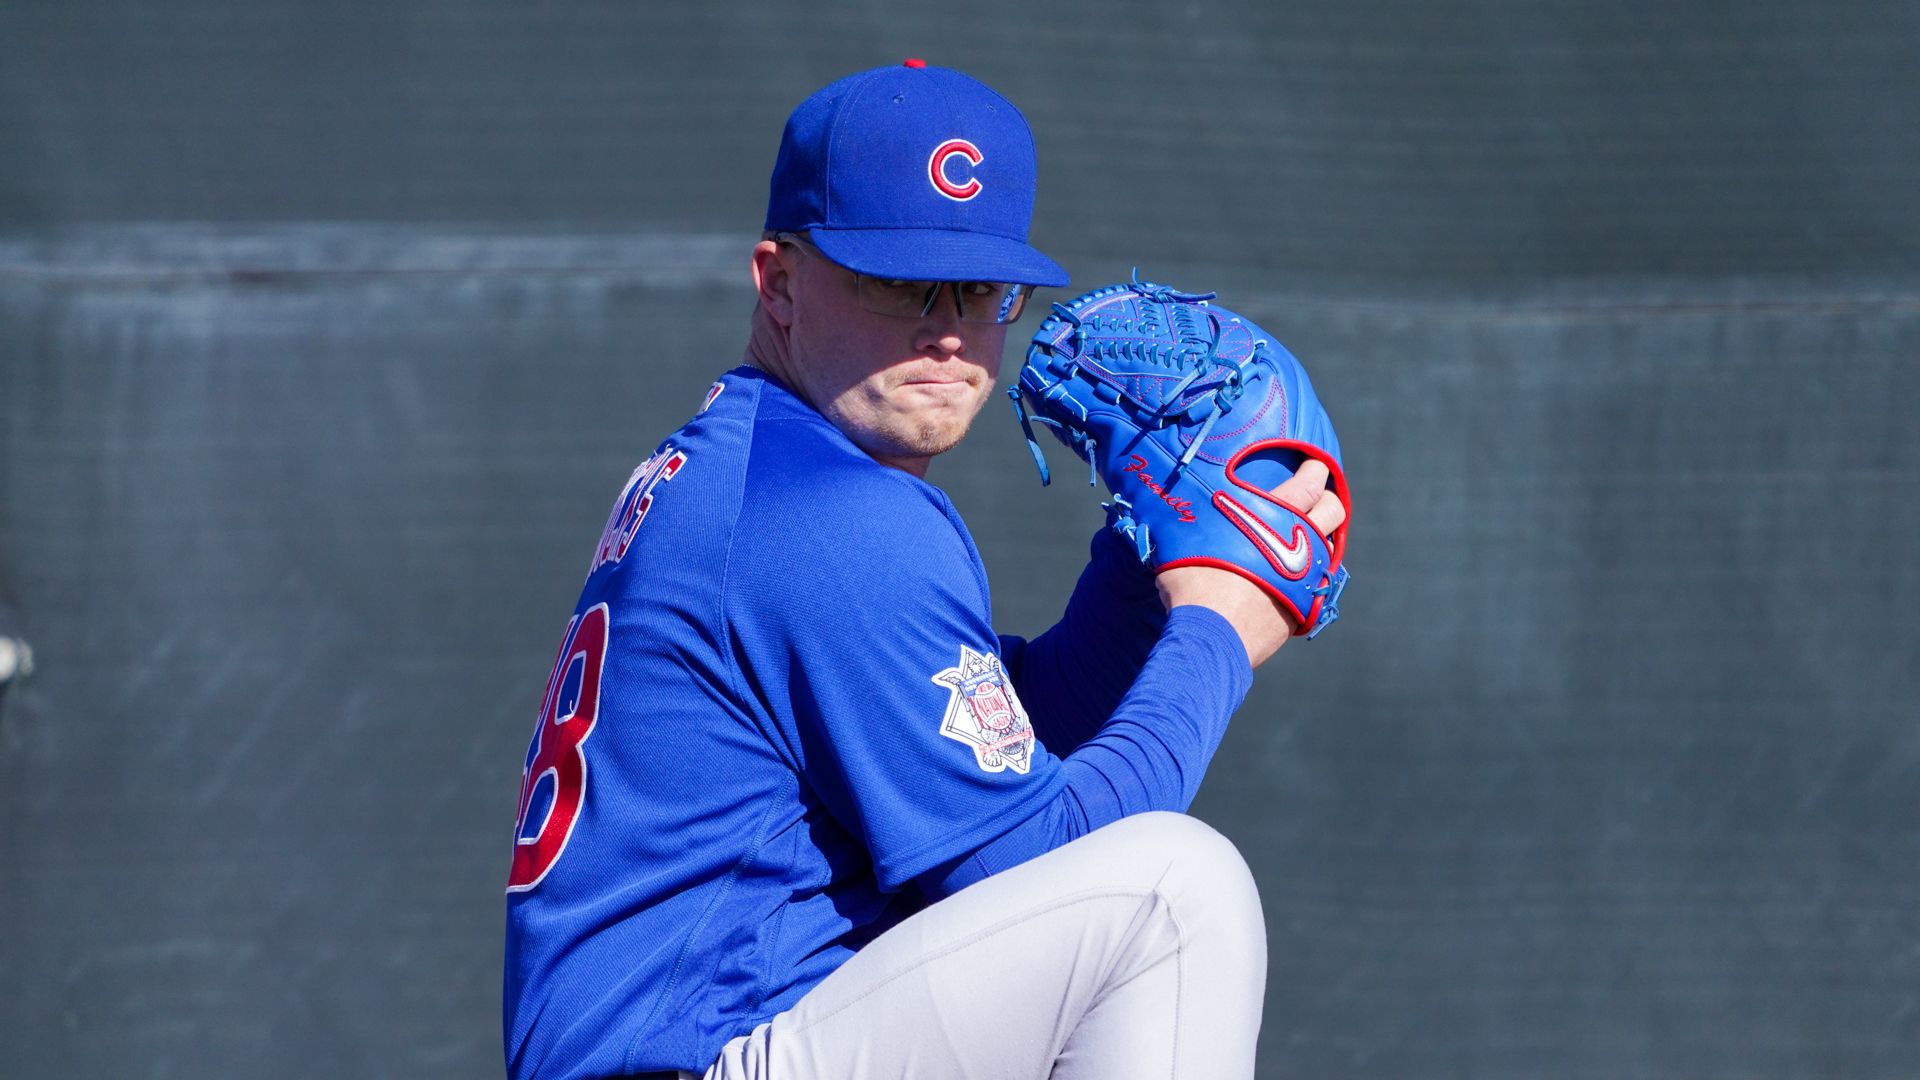 Chicago Cubs' Top 30 prospect who is flying under the radar